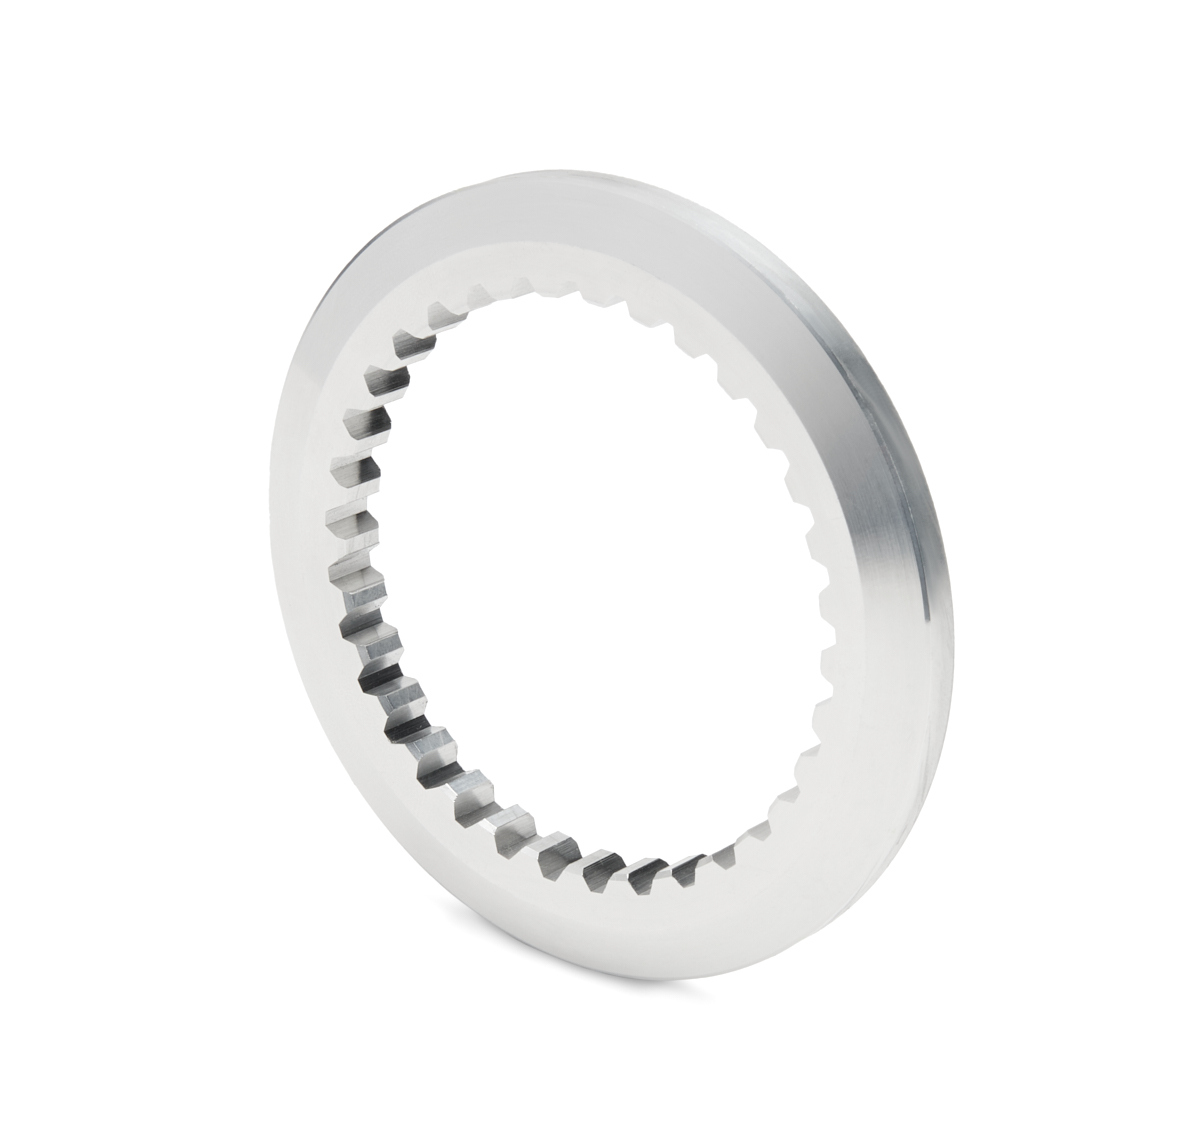 Jerico Performance 0006 - Clutch Hub Spacer, Aluminum, Natural, Jerico Dirt Transmission, Each